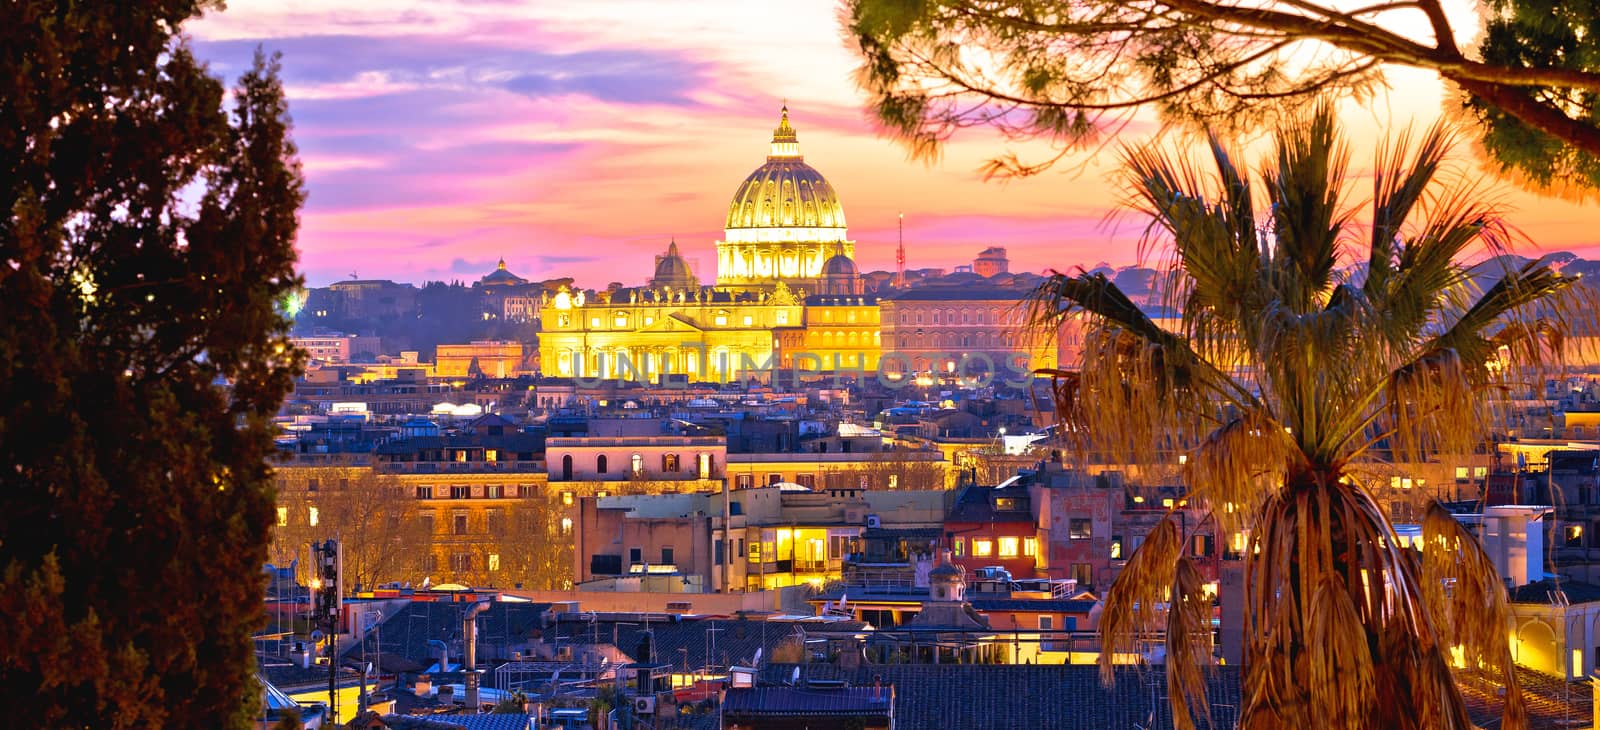 Ancient Rome rooftops and Vatican evening panoramic view by xbrchx